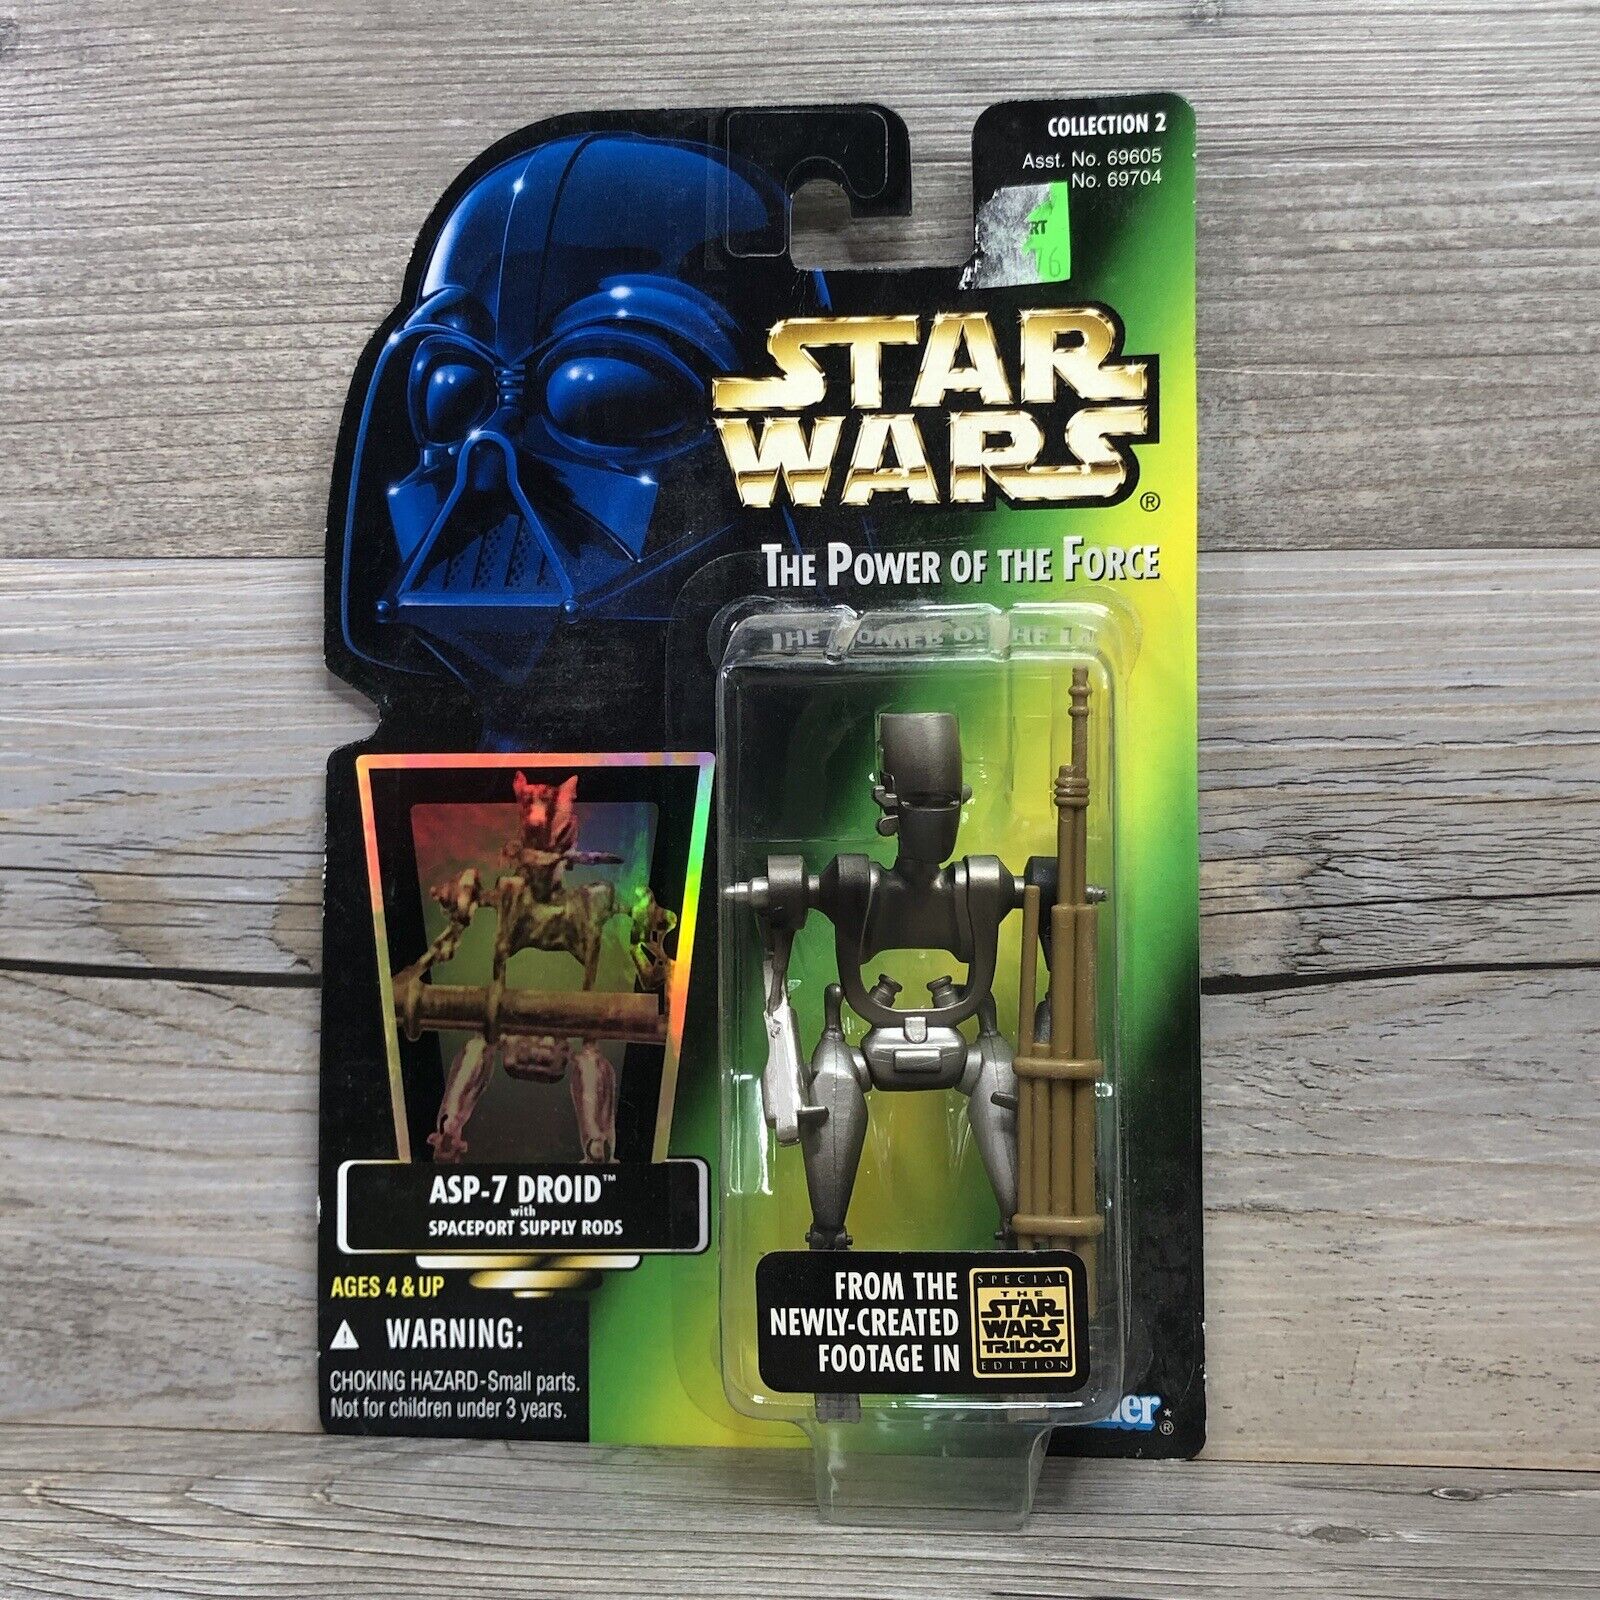 ASP-7 Droid Star Wars The Power of the Force VINTAGE SEALED Collection 2 w/ Rods